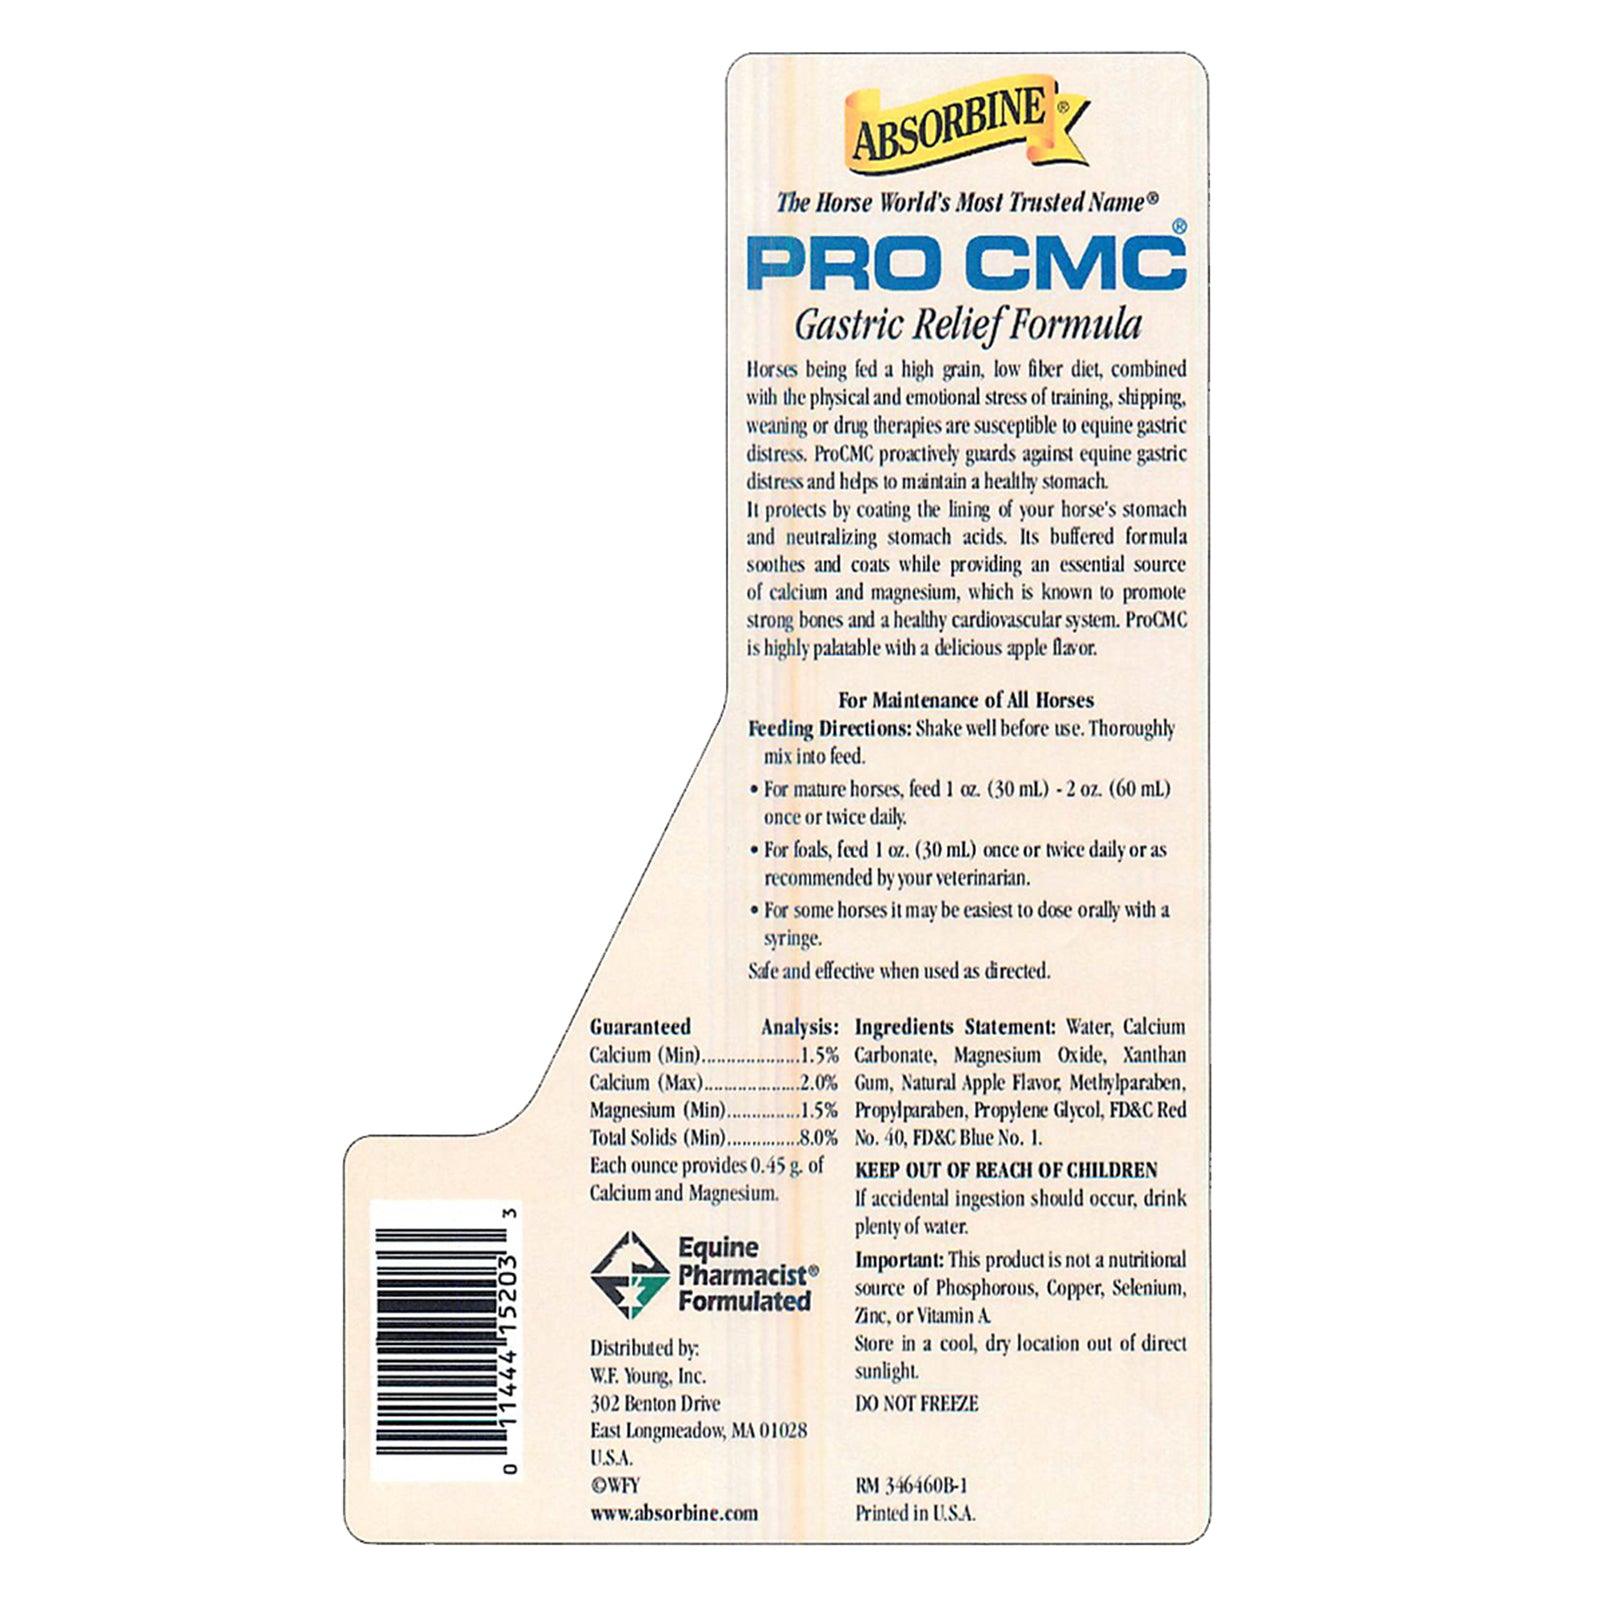 Absorbine the horse world's most trusted name Pro CMC Gastric Relief Formula back label.